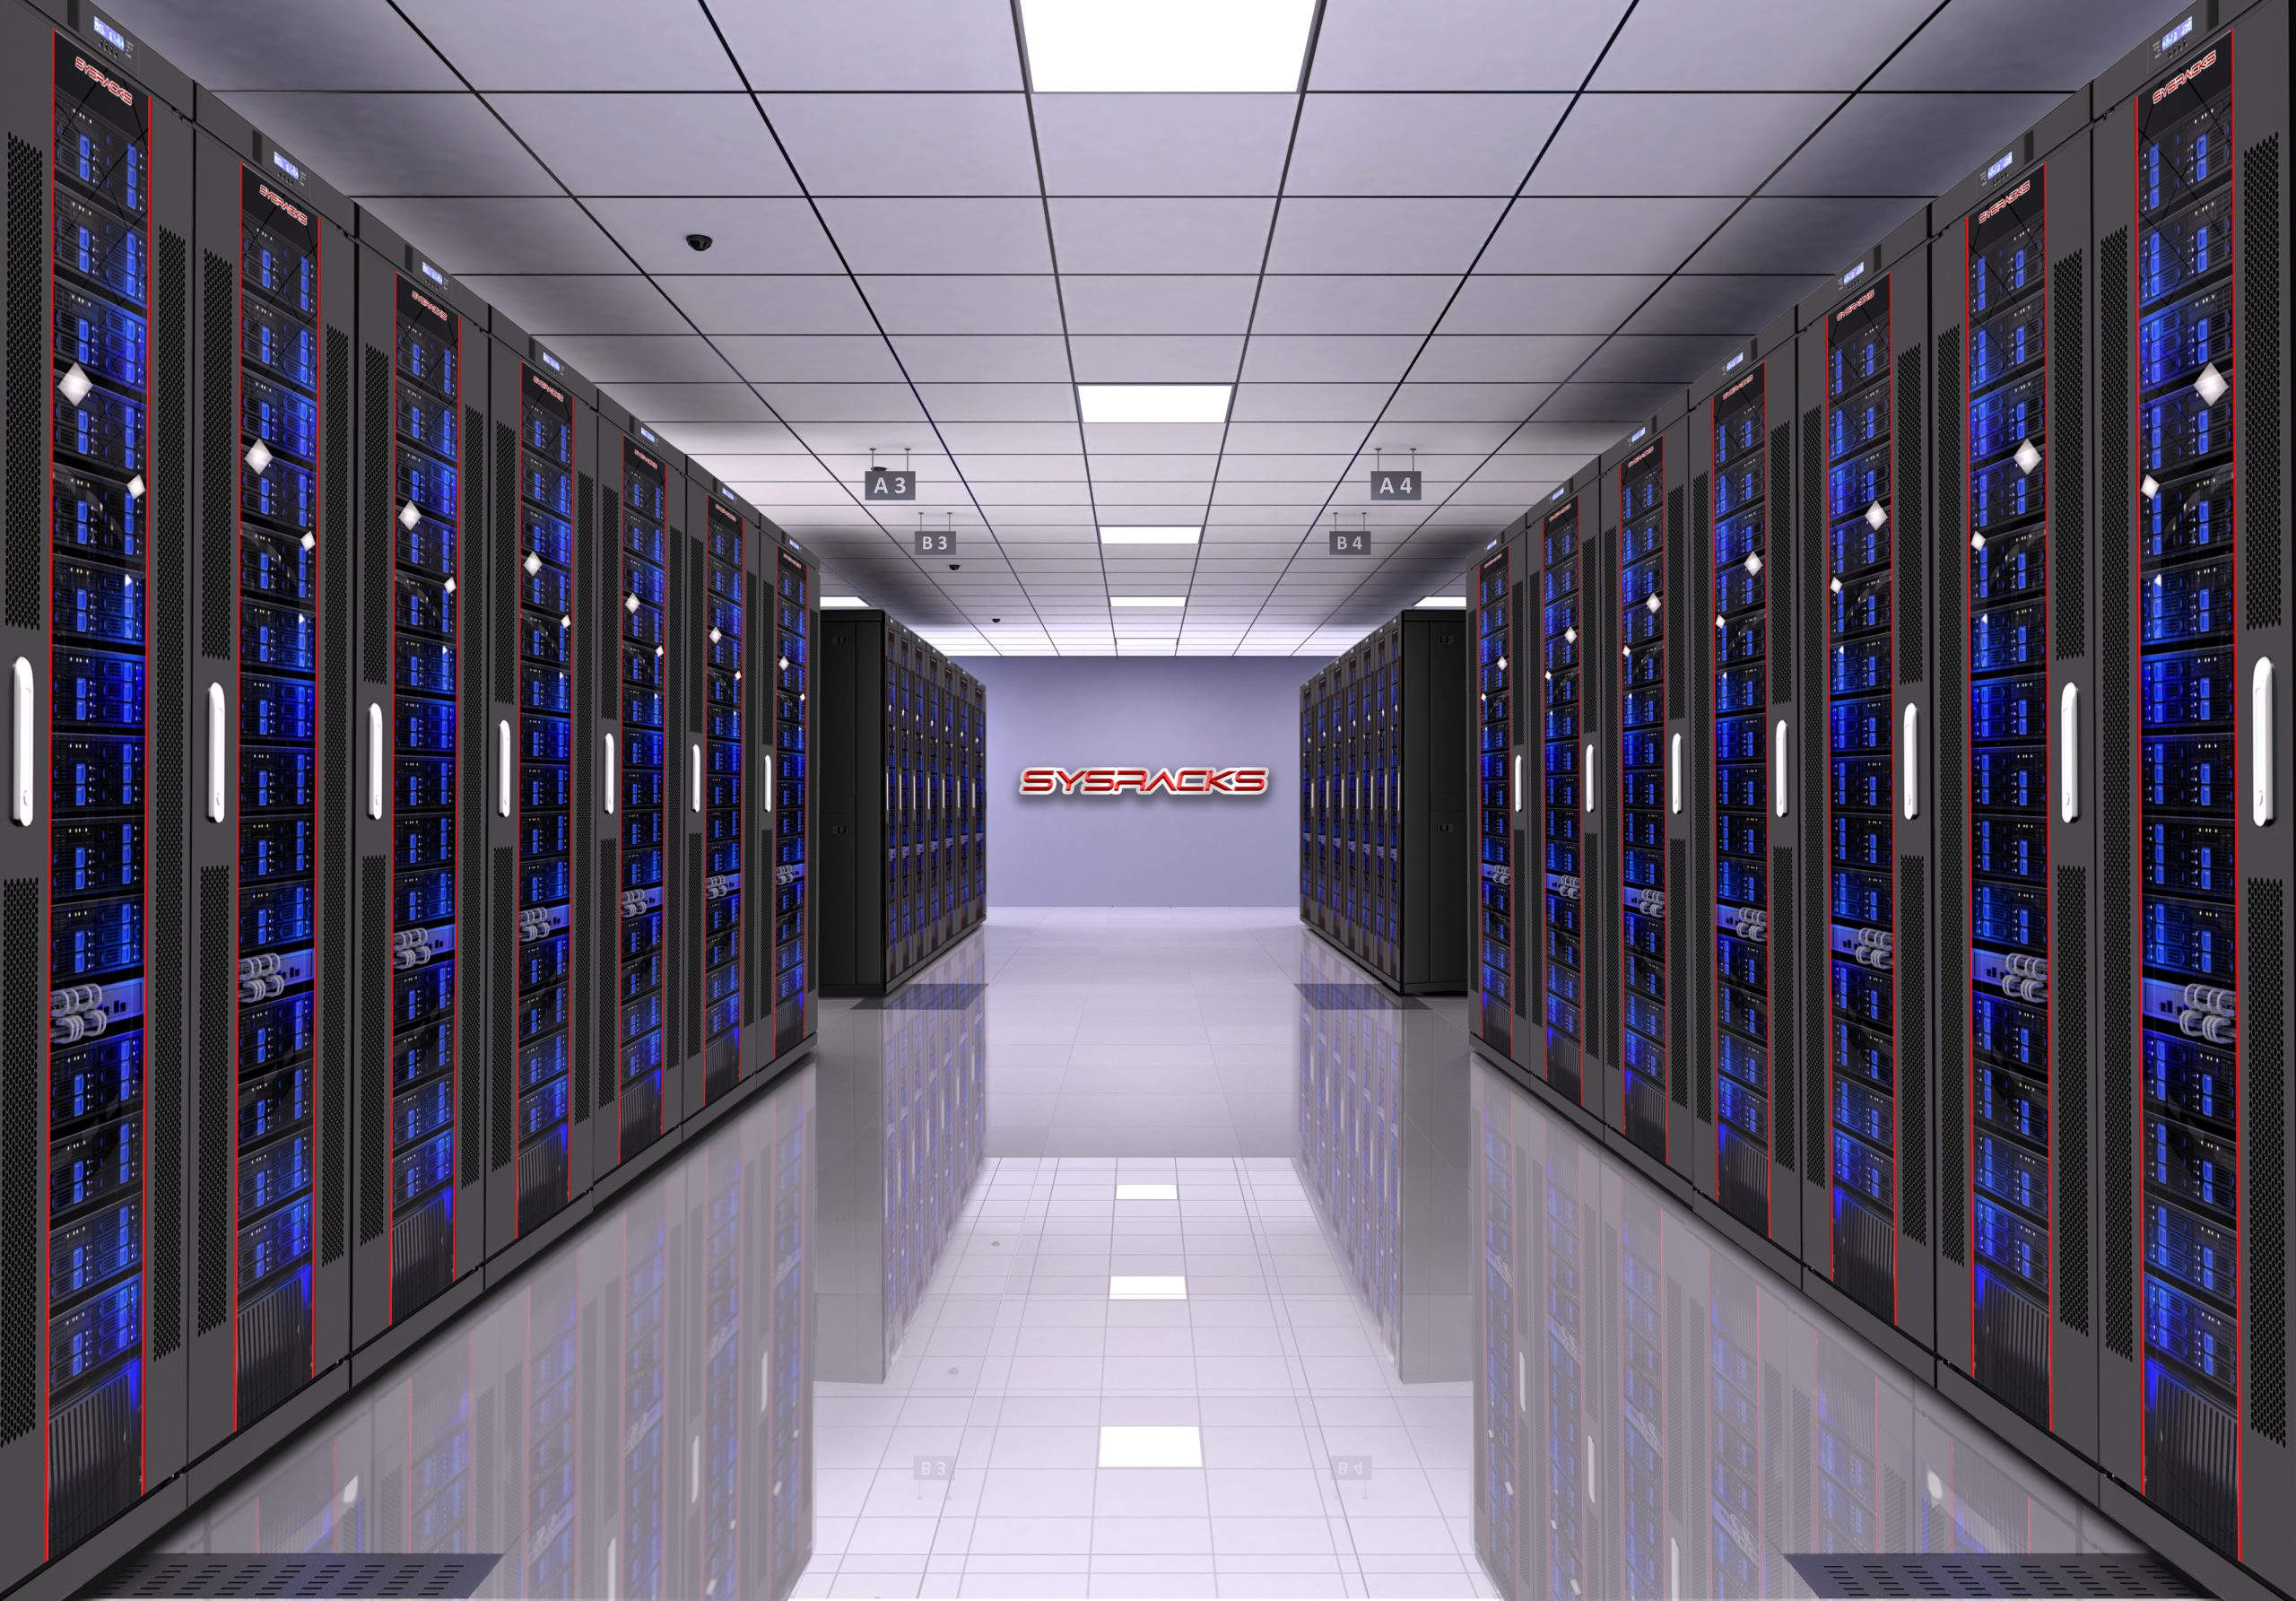 How to Improve Data Center Efficiency?